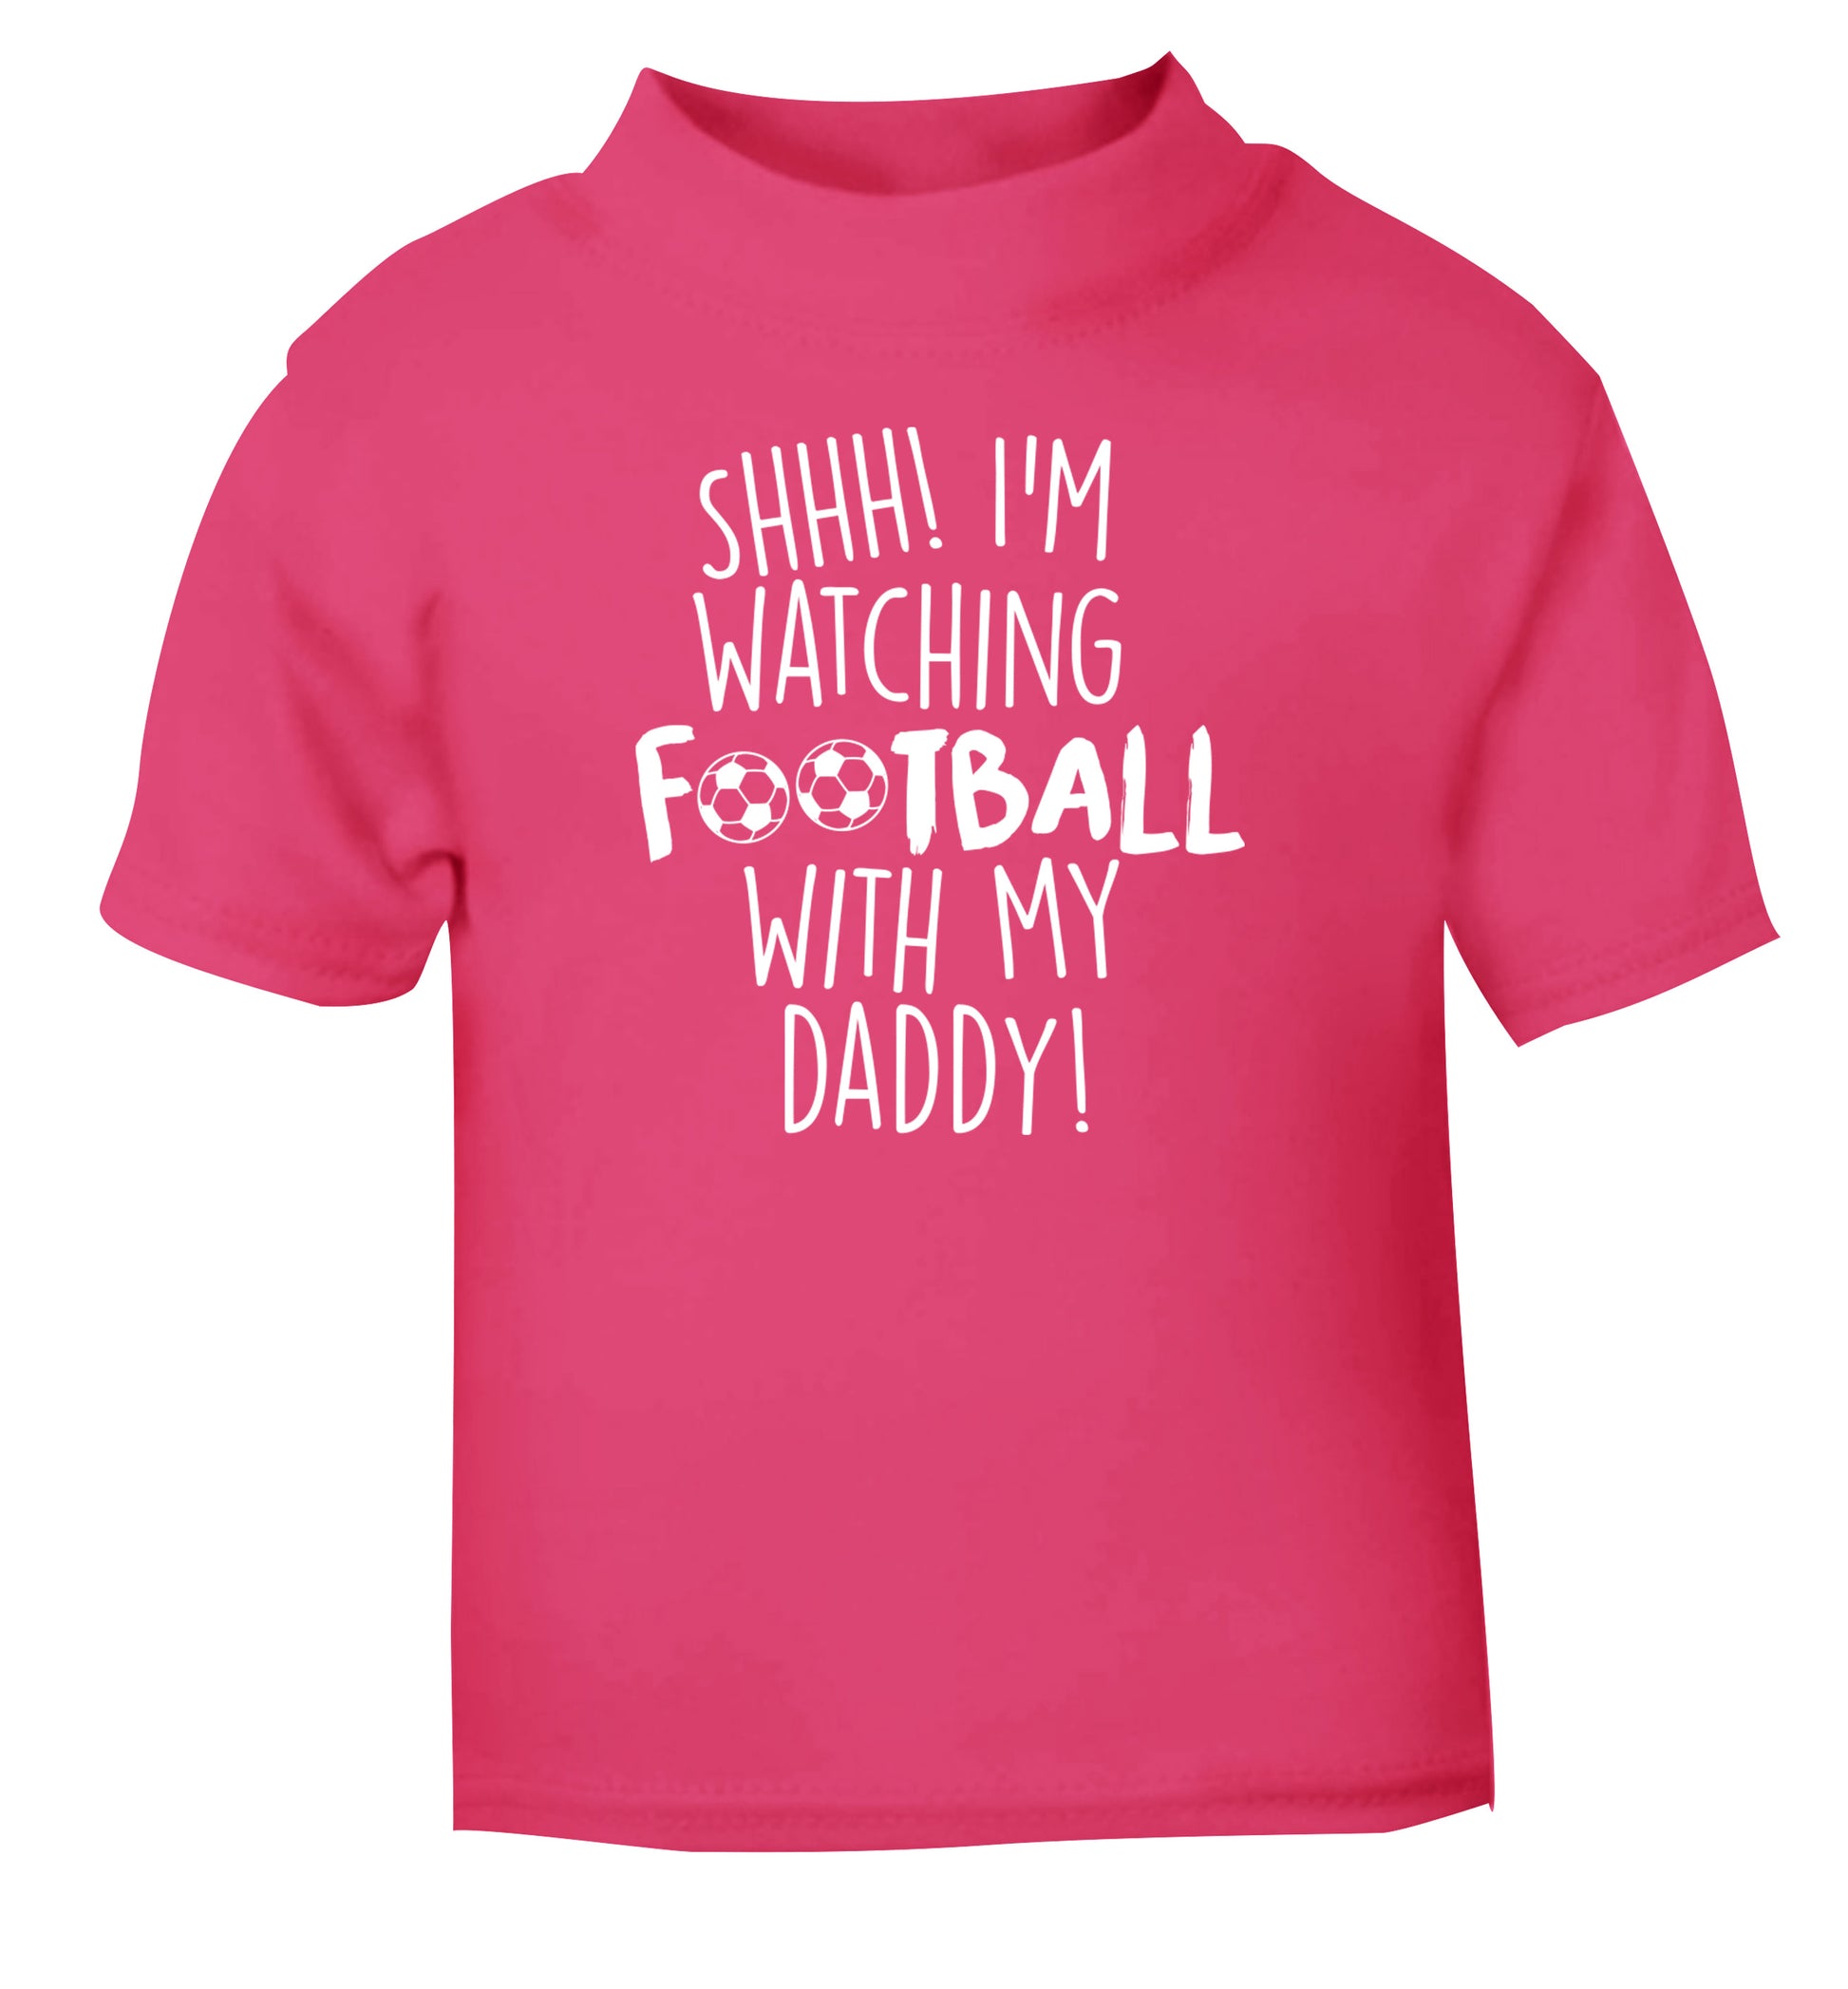 Shhh I'm watching football with my daddy pink Baby Toddler Tshirt 2 Years